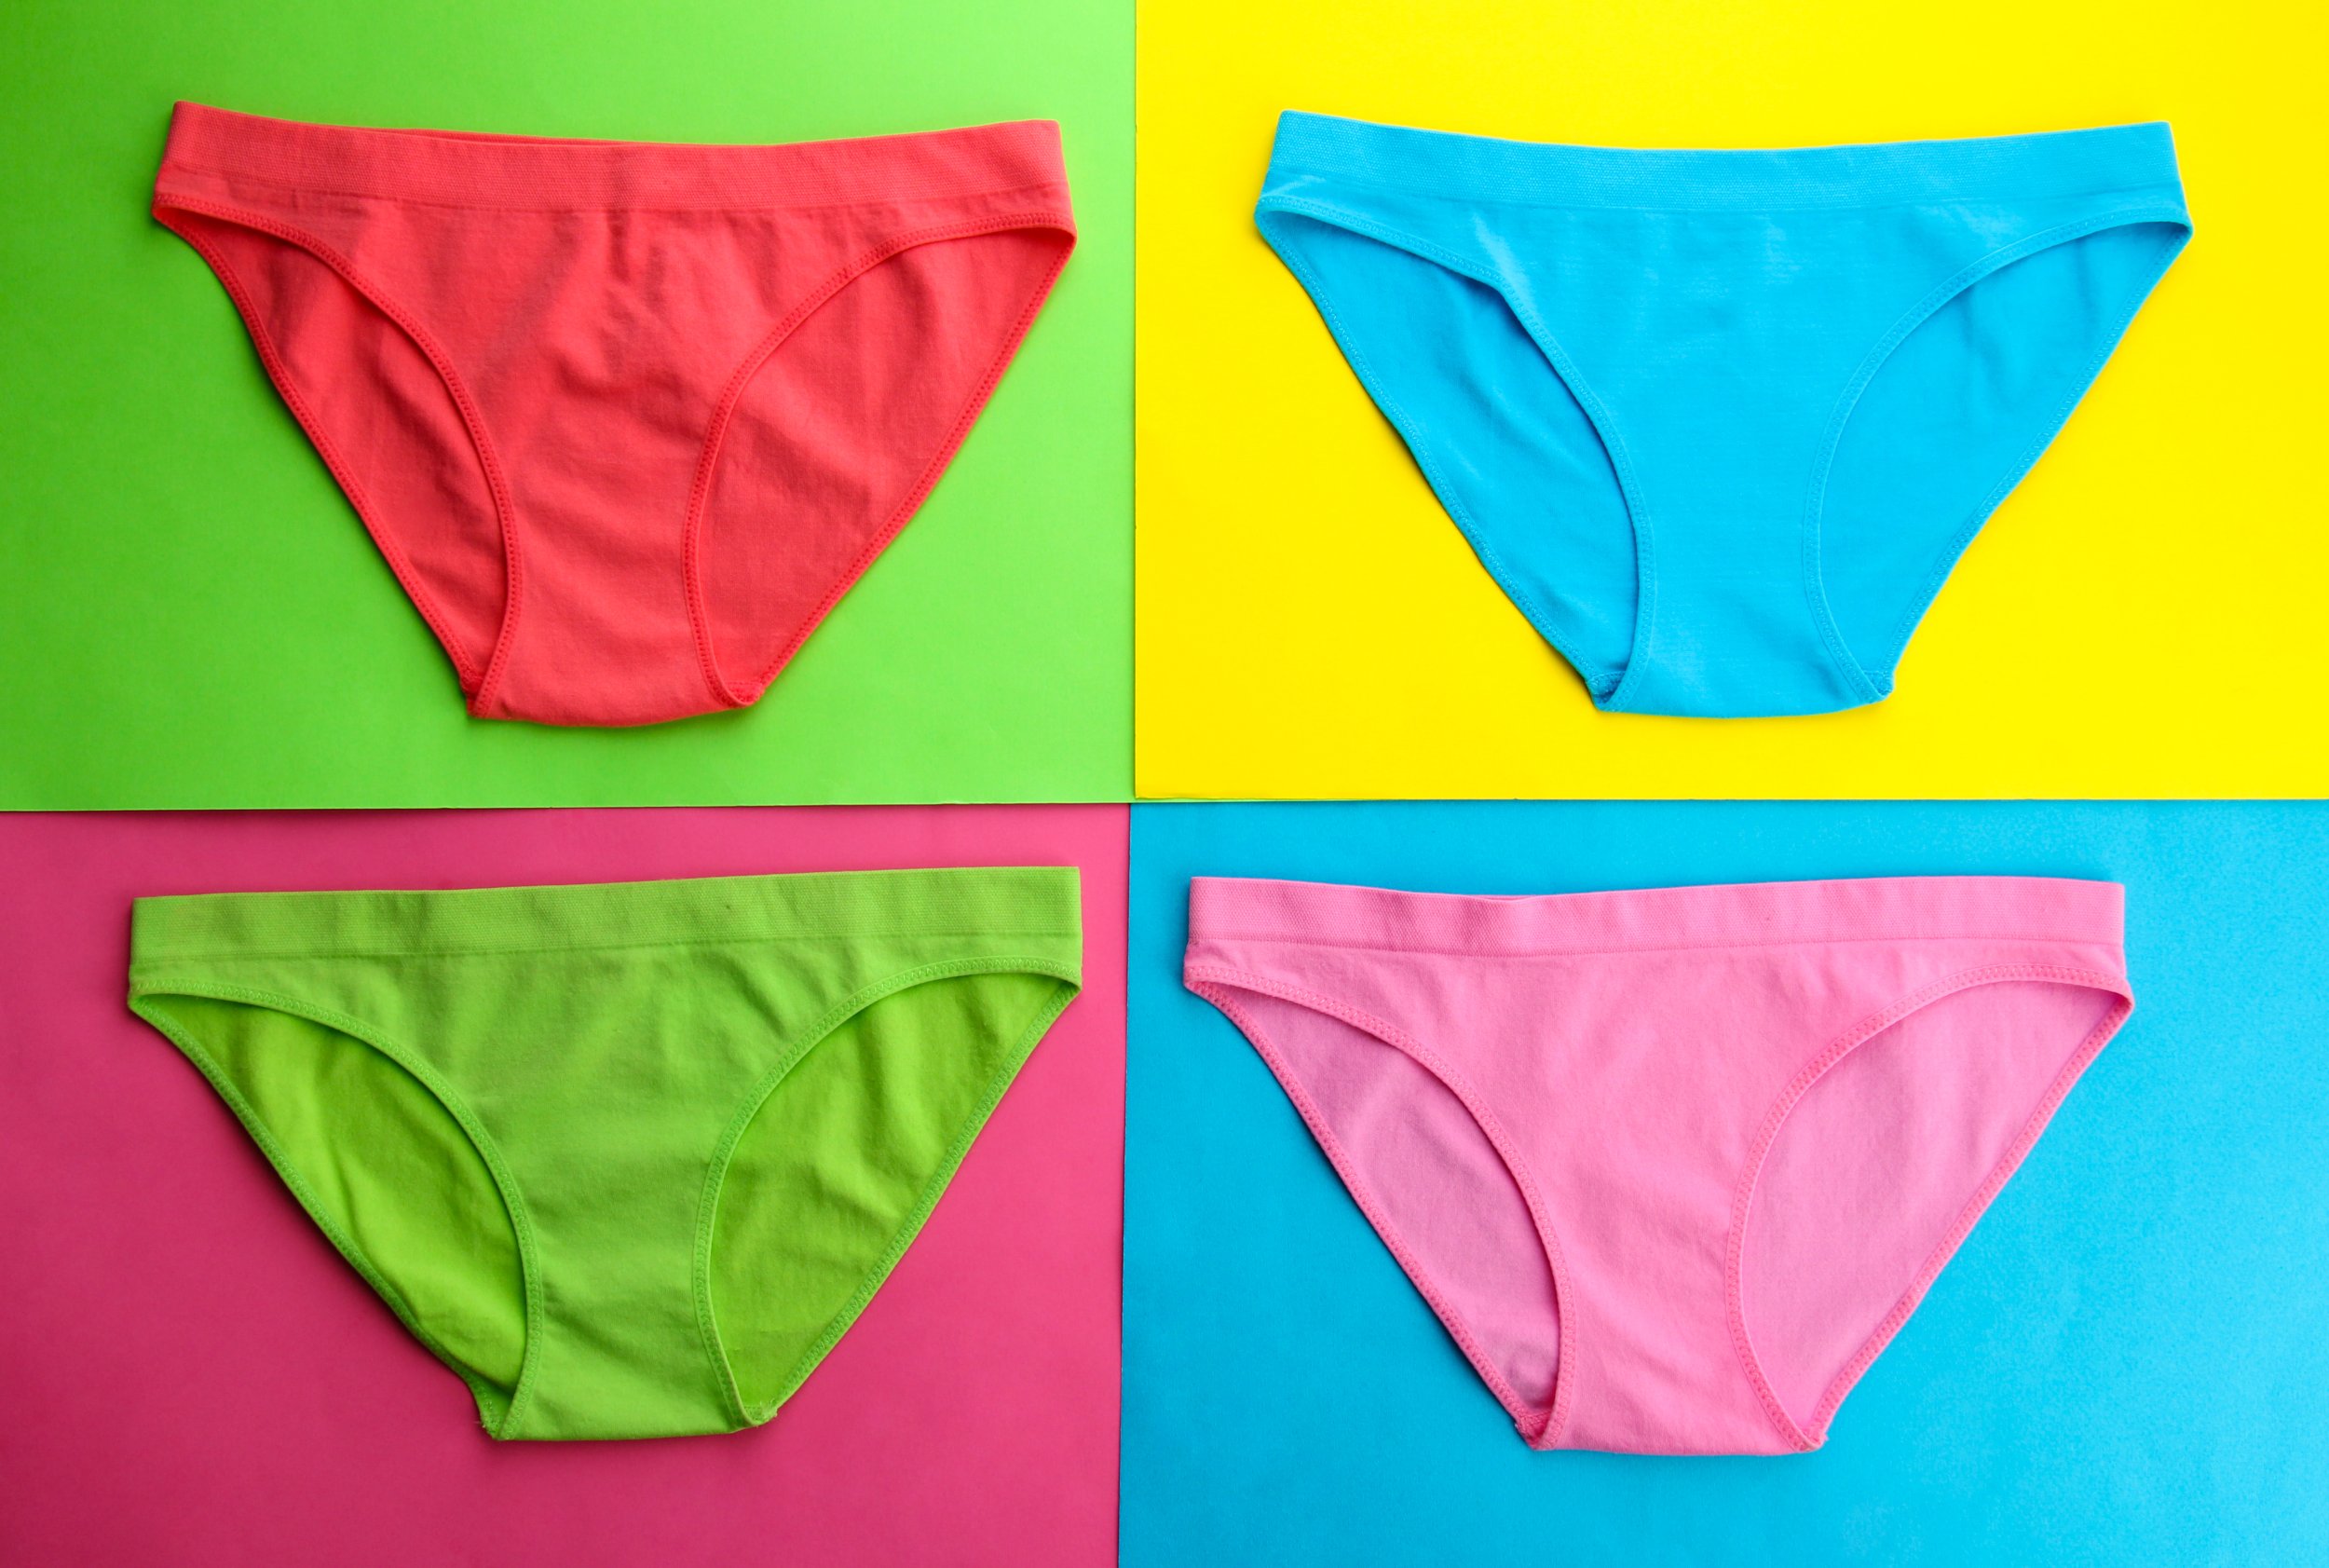 Underwear Fetishes Are Caused By Decreased Blood Flow In The Brain